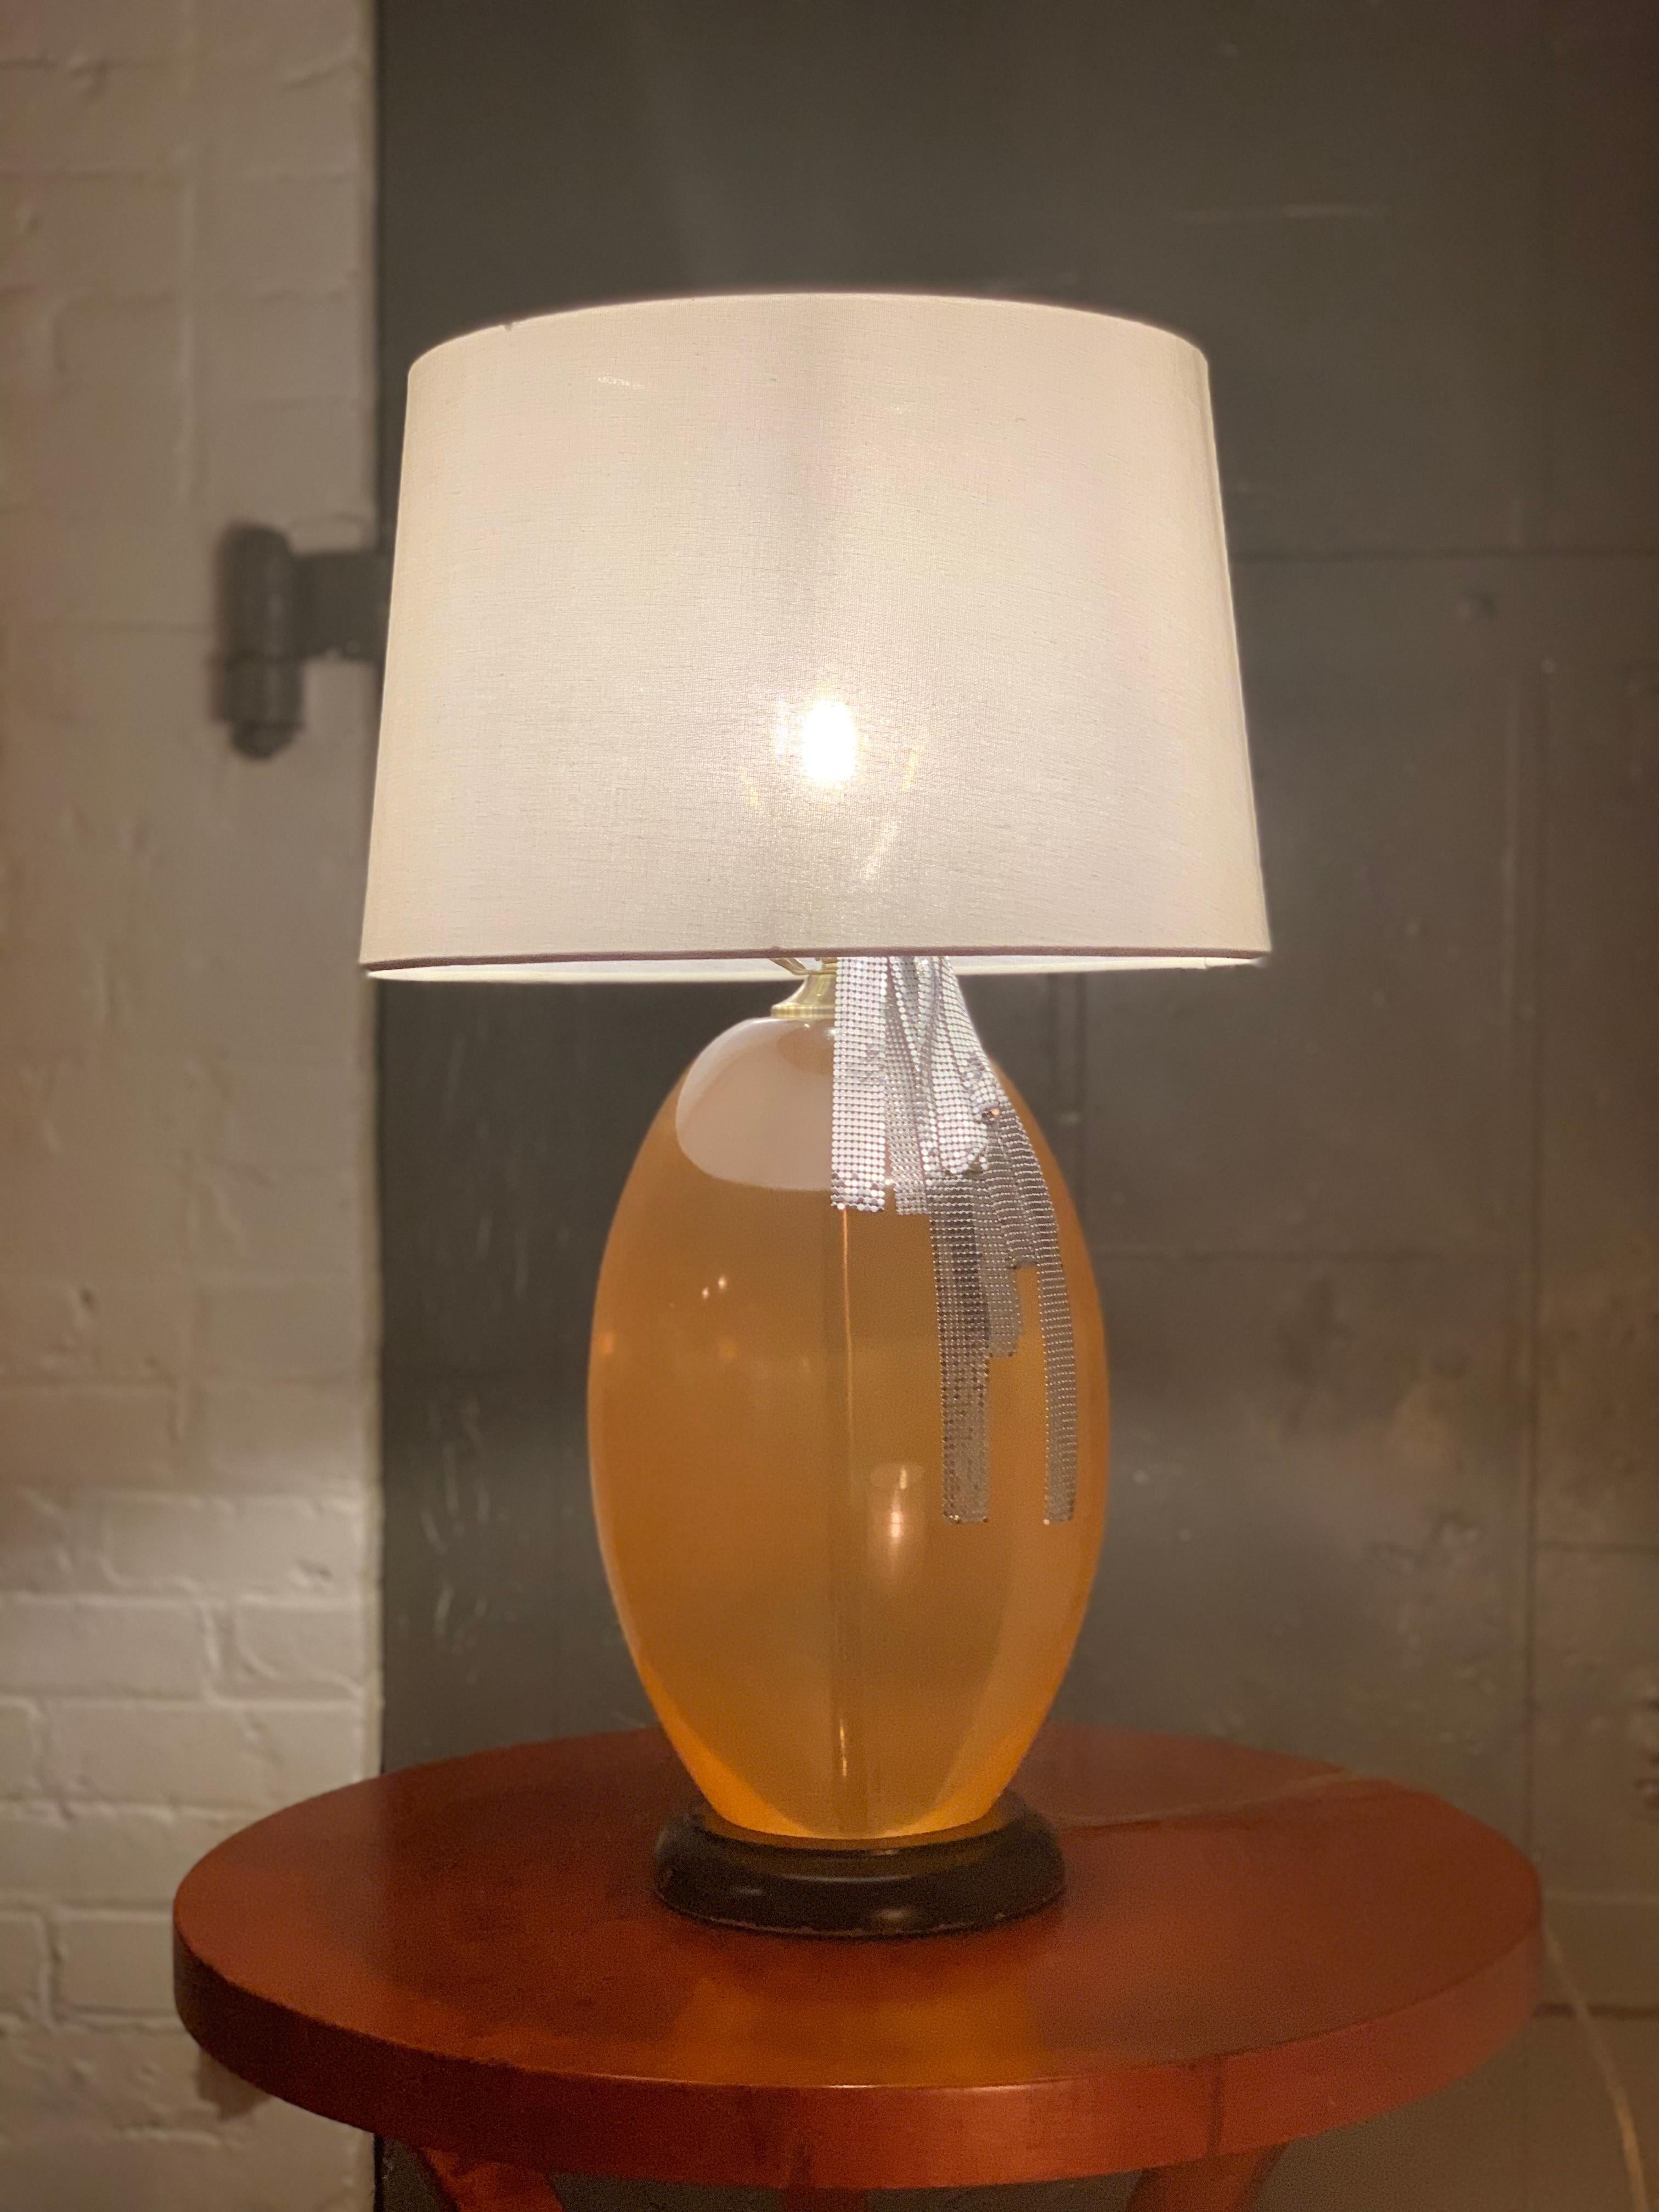 20th Century Modern Peach Lucite Midcentury Monumental  Sculptural Egg Form Table Lamp For Sale